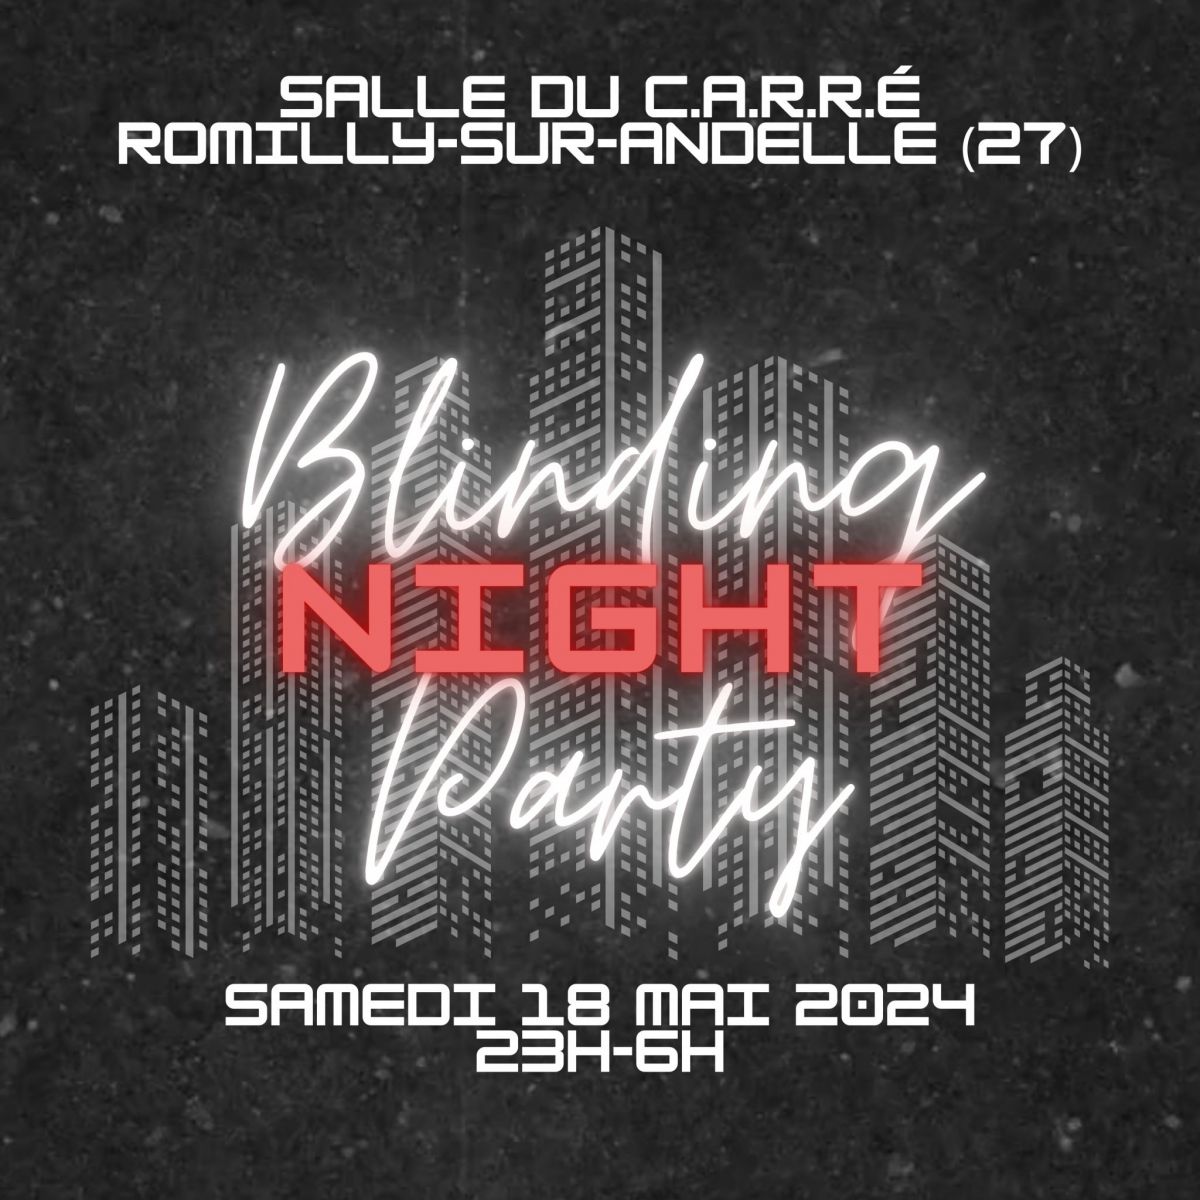 Blinding Night Party